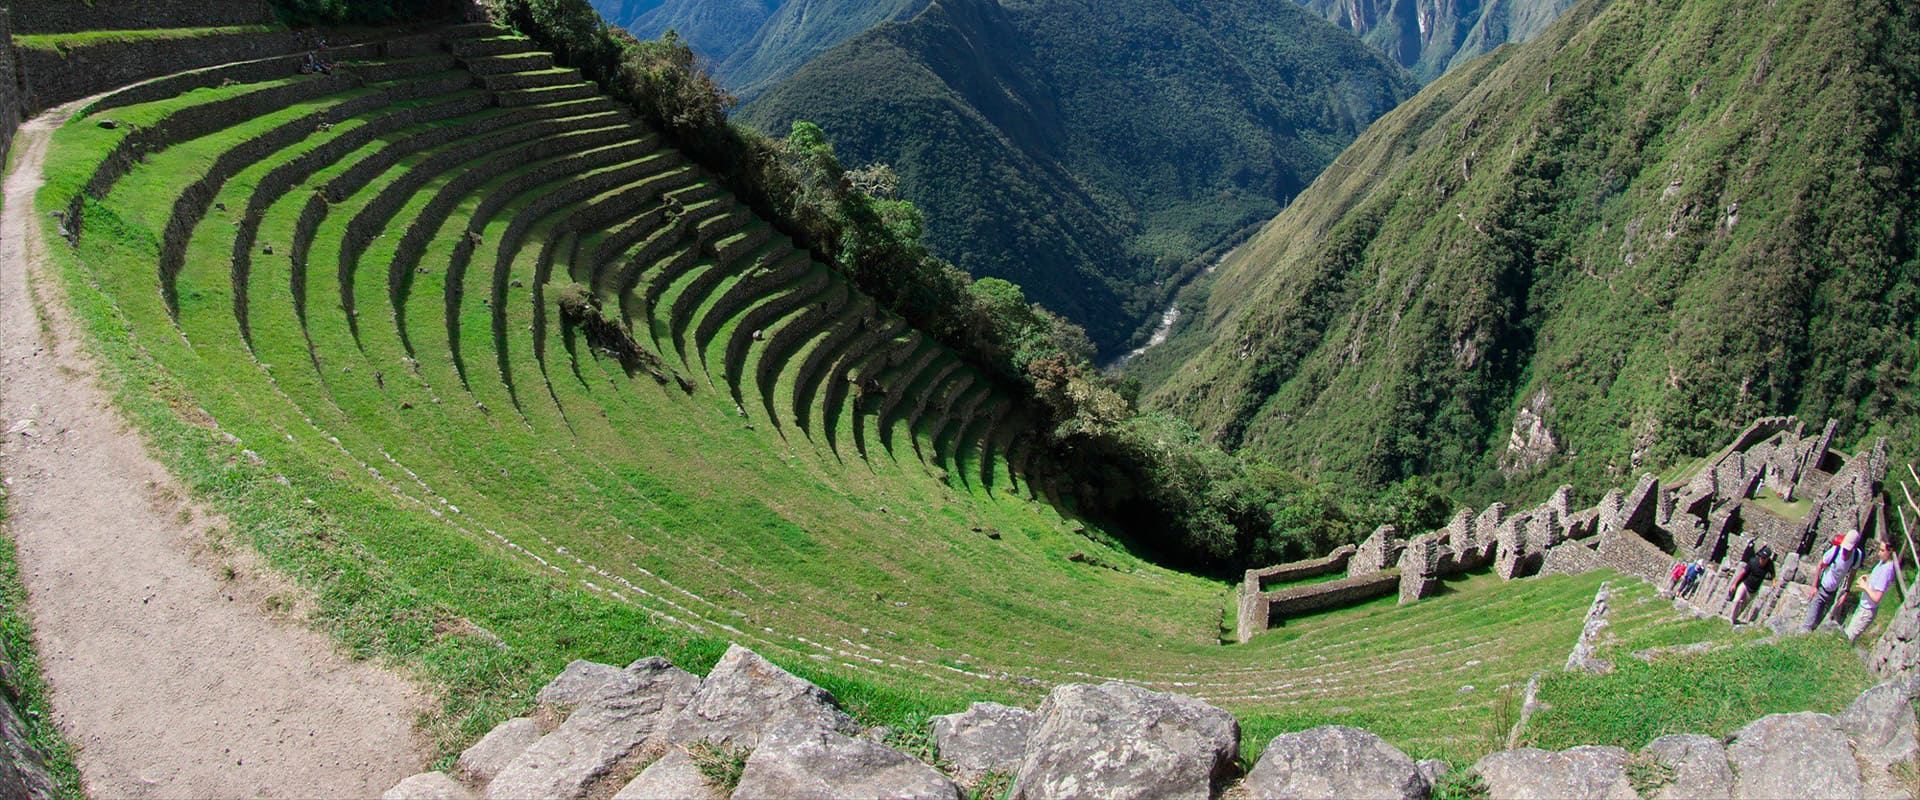 Tours: Short Inca Trail to Machu Picchu with Camping 2D/1N